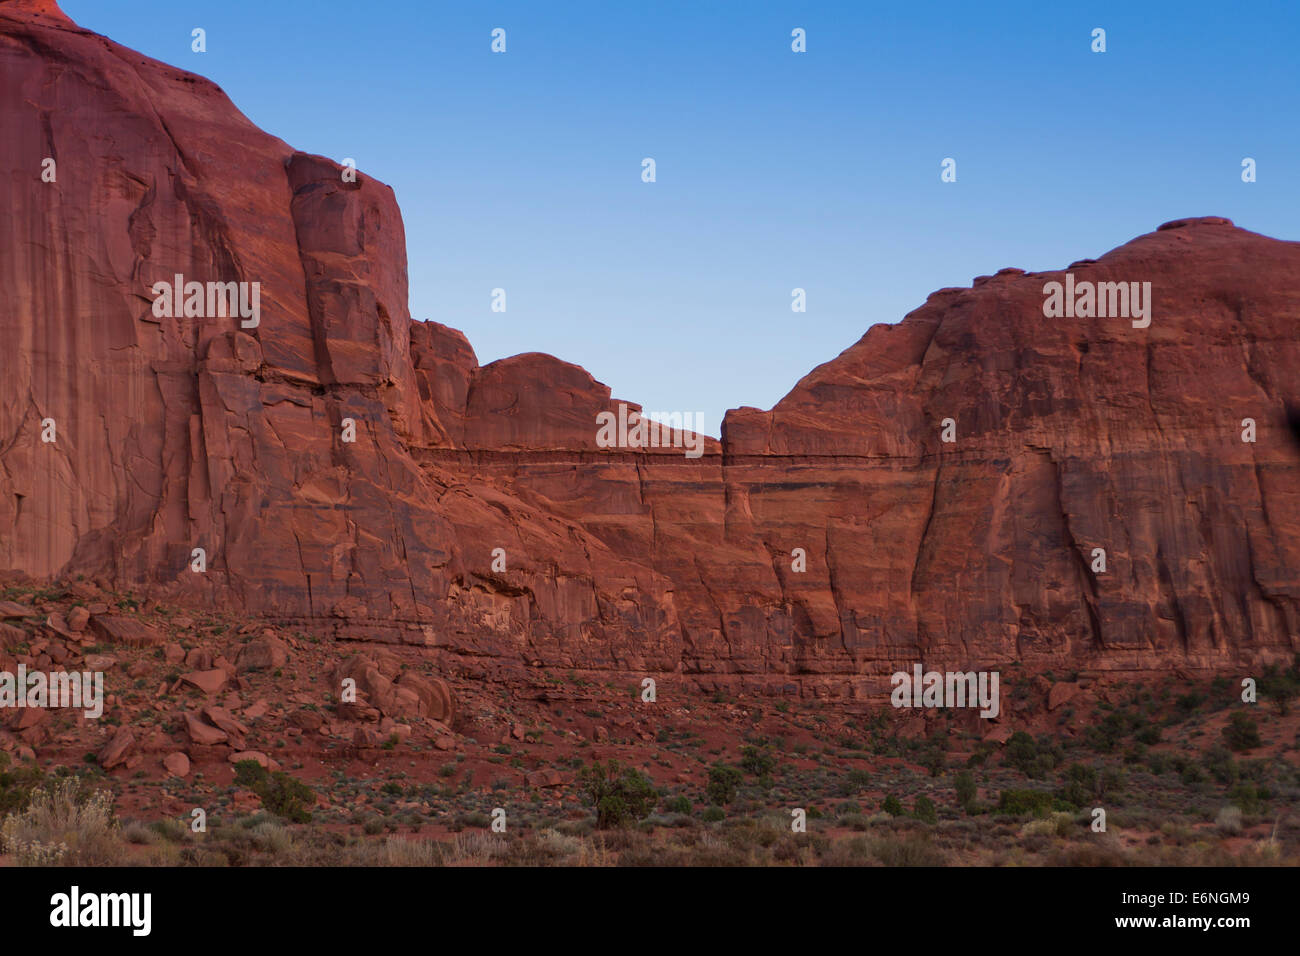 Exposed red sandstone rock formation - Utah USA Stock Photo